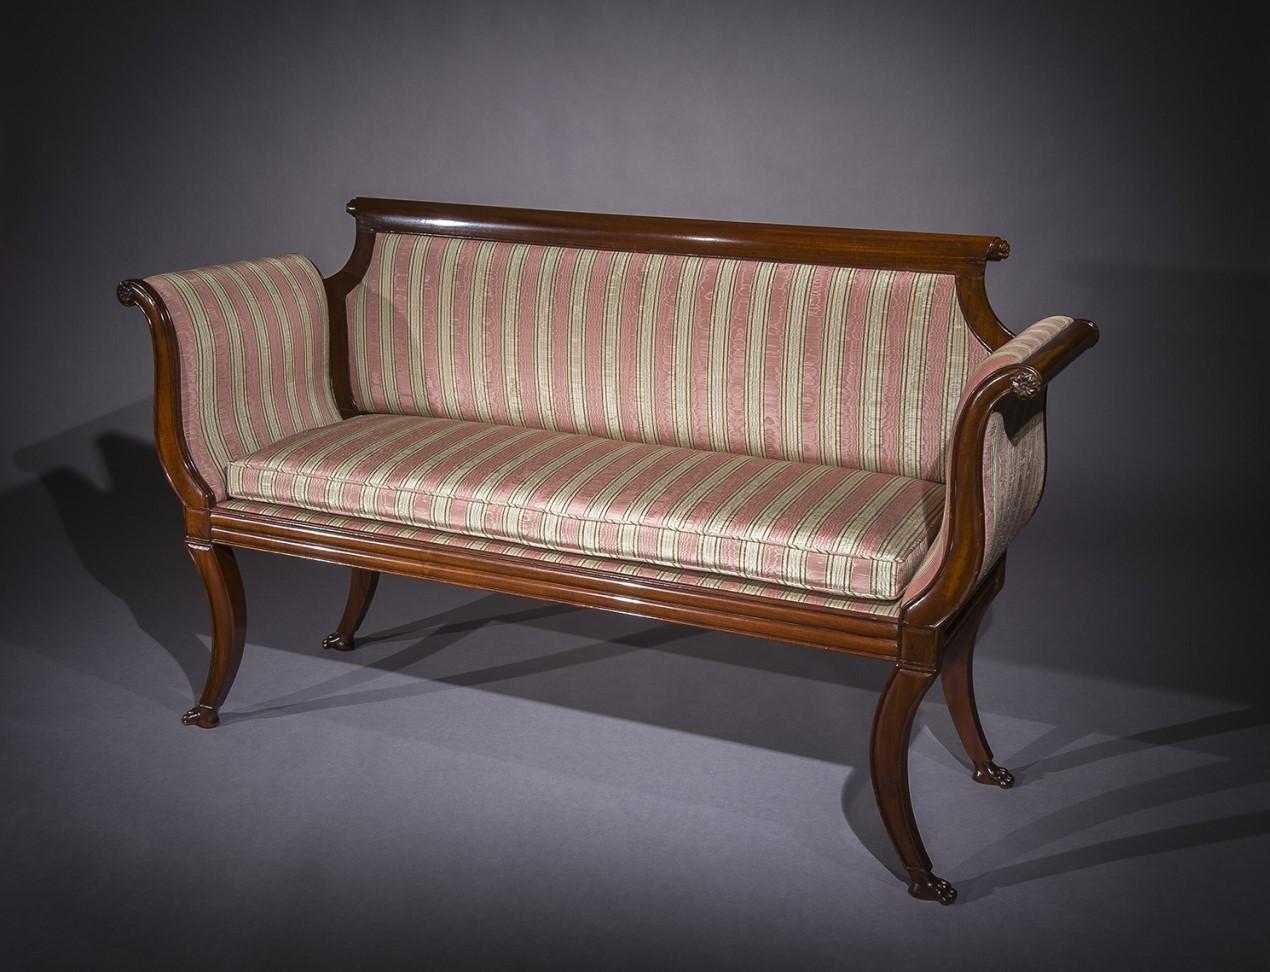 Small Settee in the neoclassical taste
Boston, Massachusetts (active 1804–17), about 1810
Mahogany (secondary woods: ash)
Measures: 35 1/8 in. high, 59 3/4 in. long, 19 1/8 in. deep

Although the diminutive scale of this settee places it in a unique